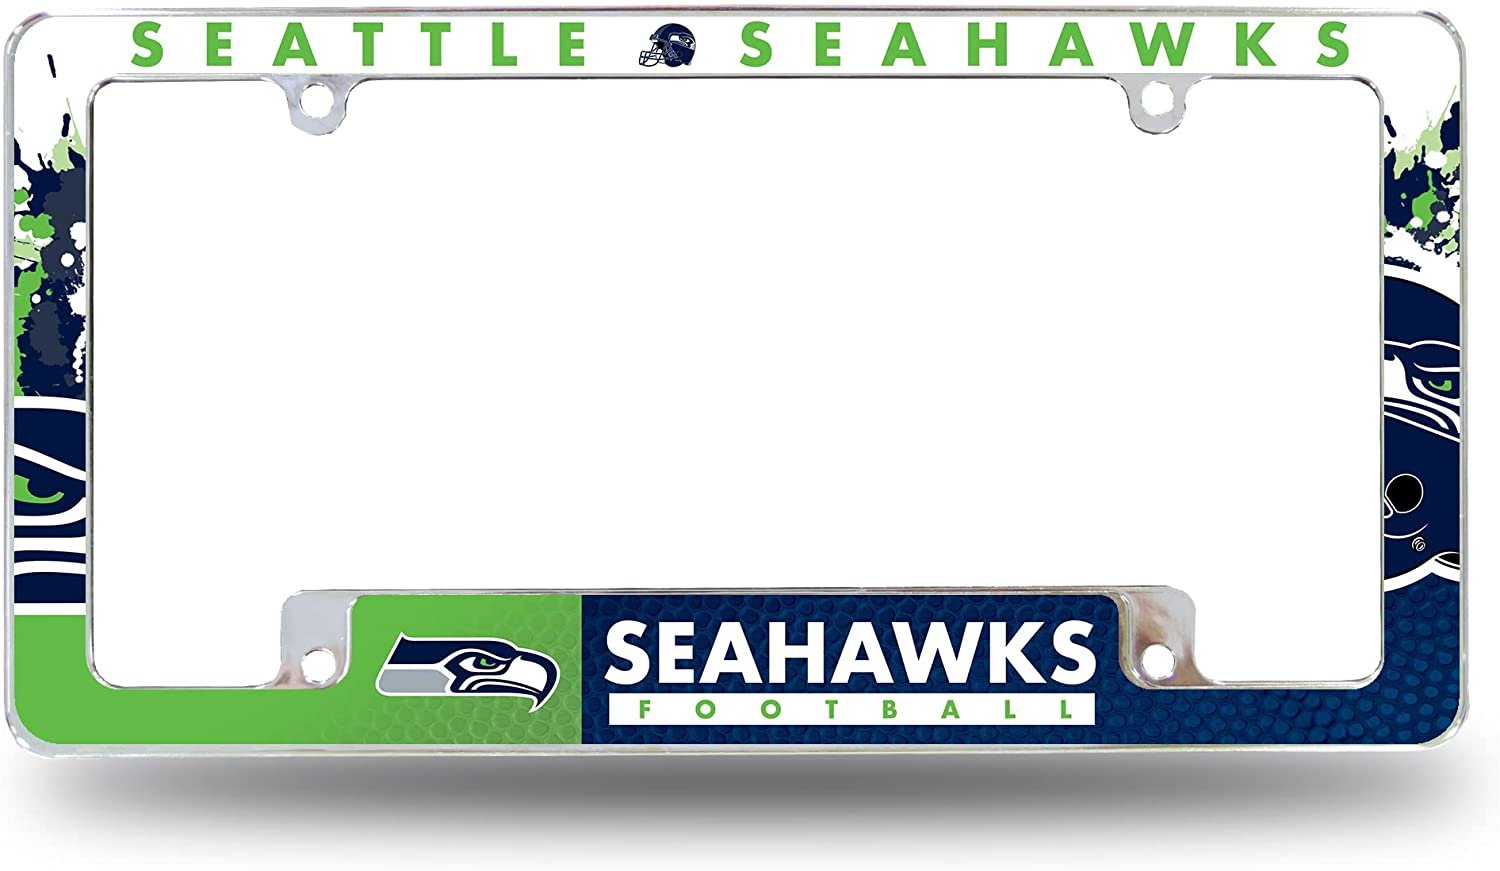 Seattle Seahawks Metal License Plate Frame Chrome Tag Cover All Over Design 12x6 Inch